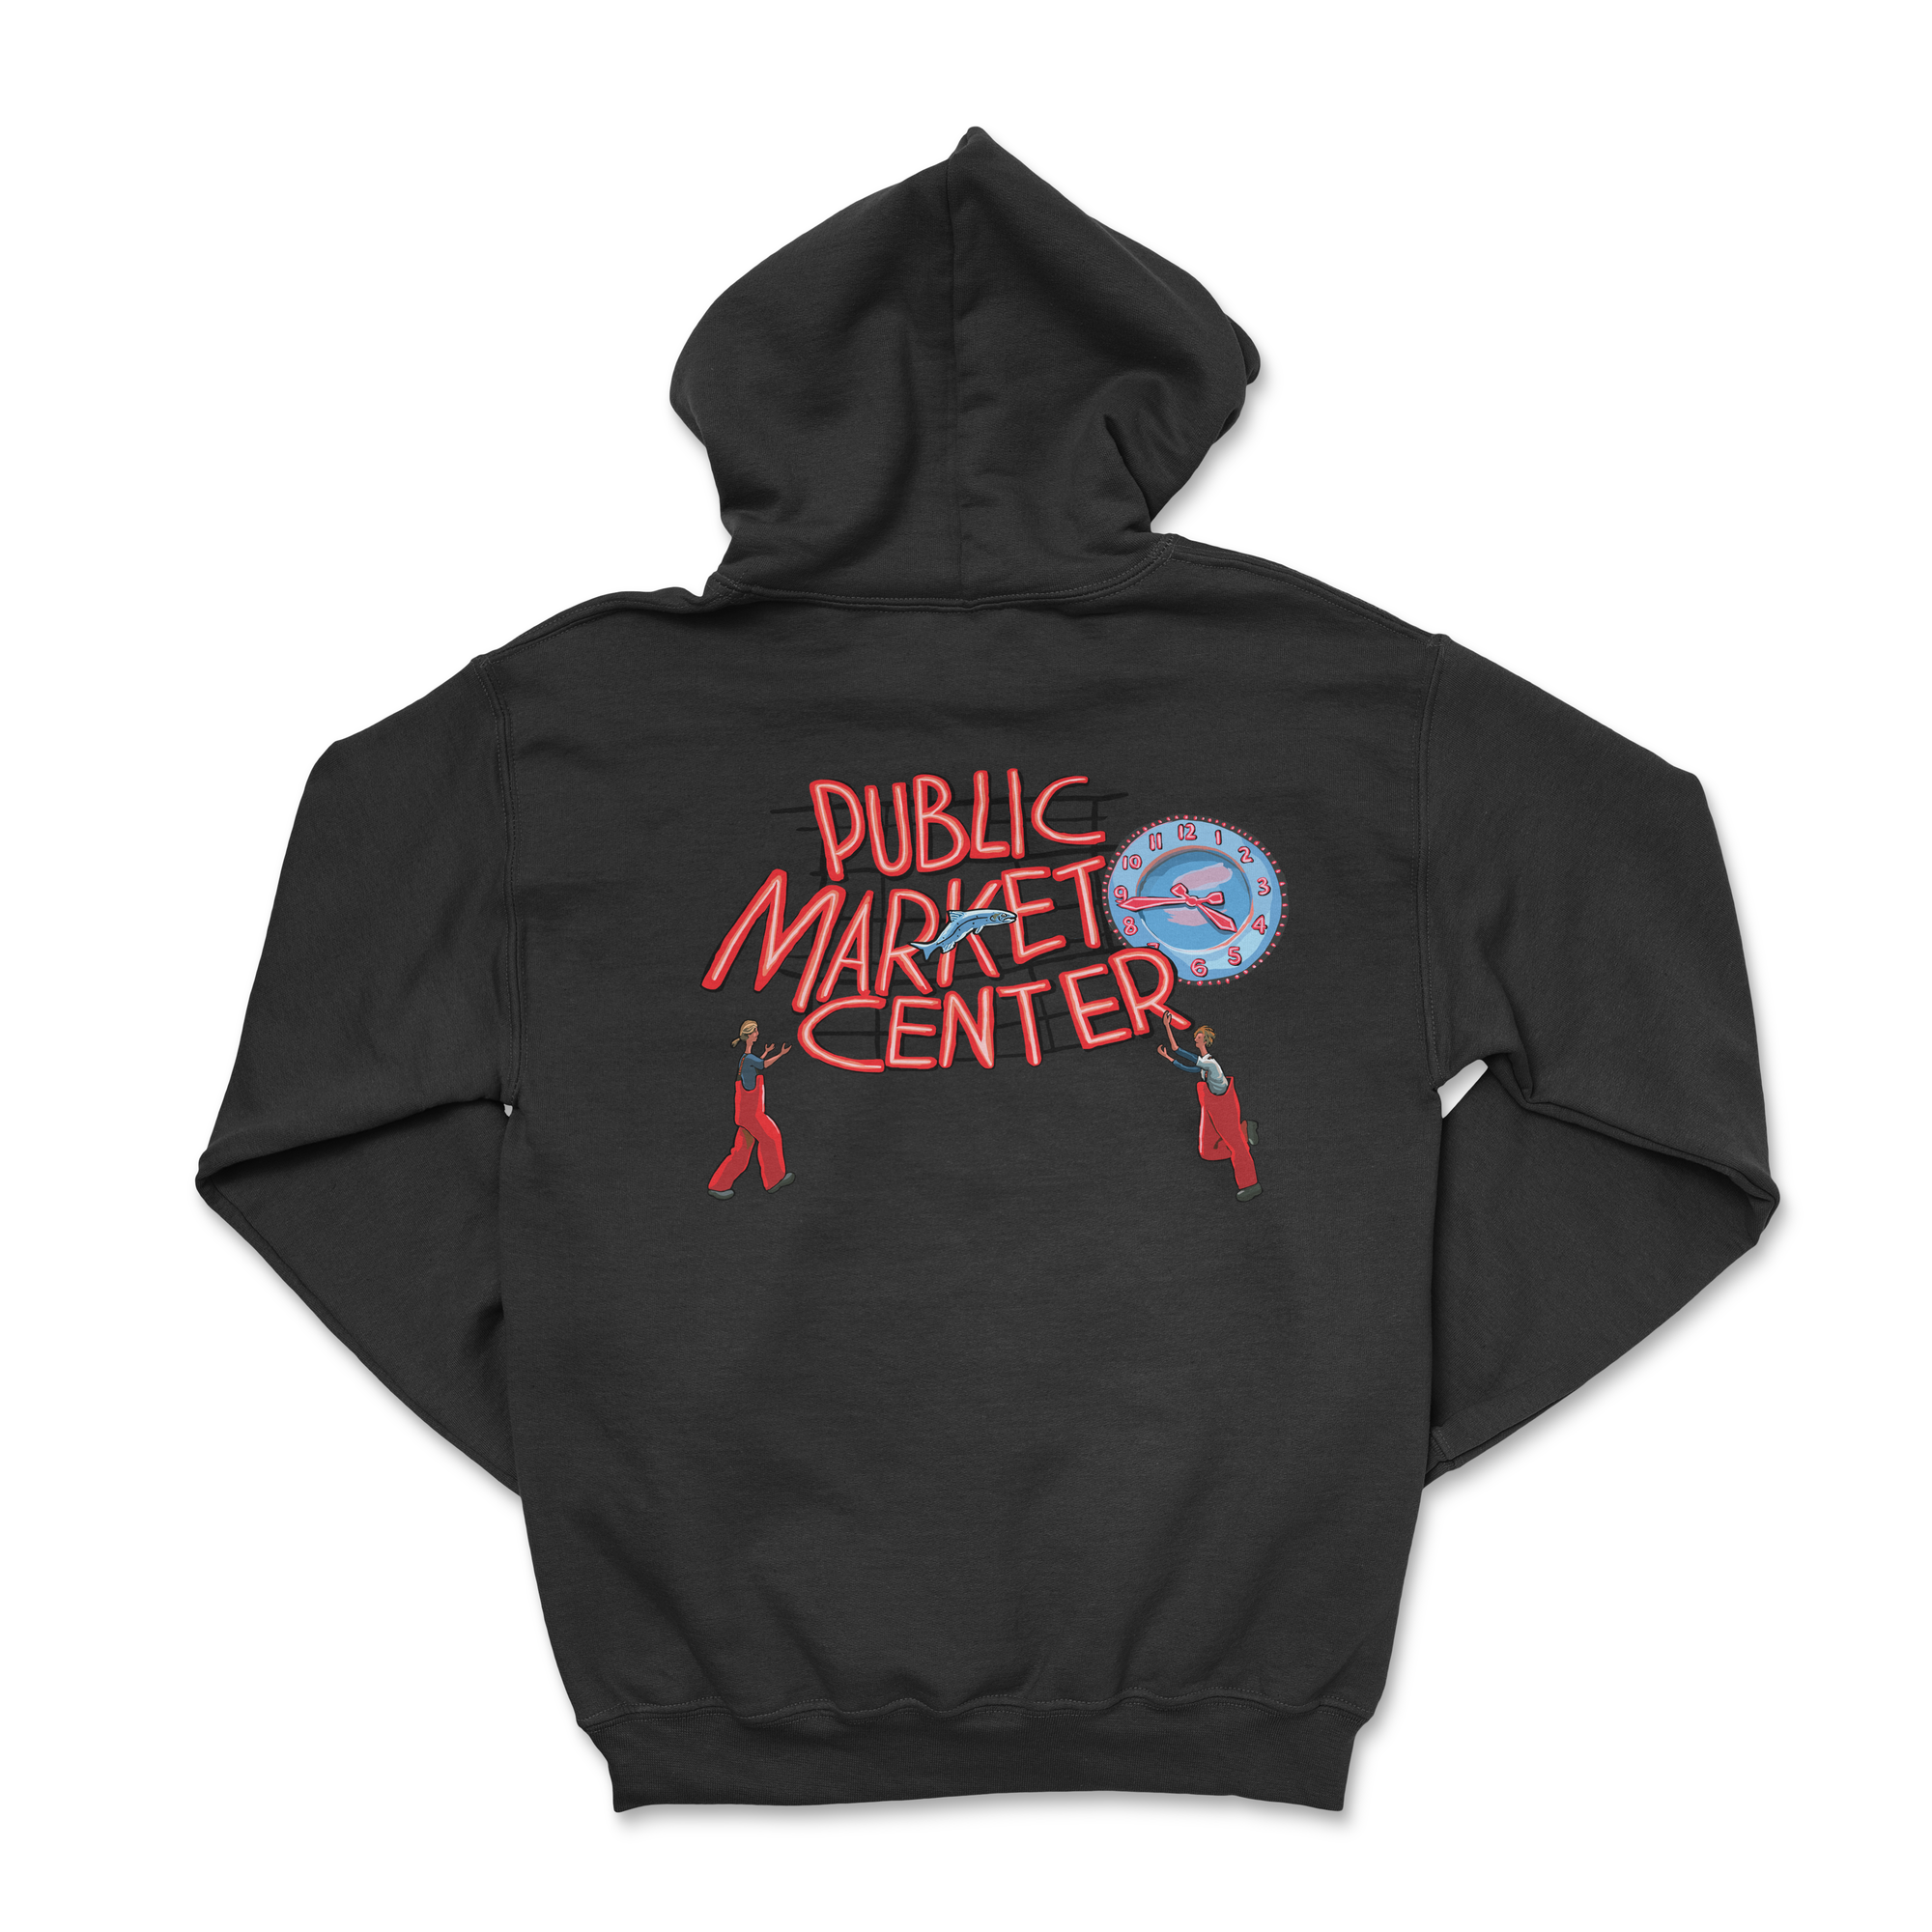 "Pike Place Market" Hoodie